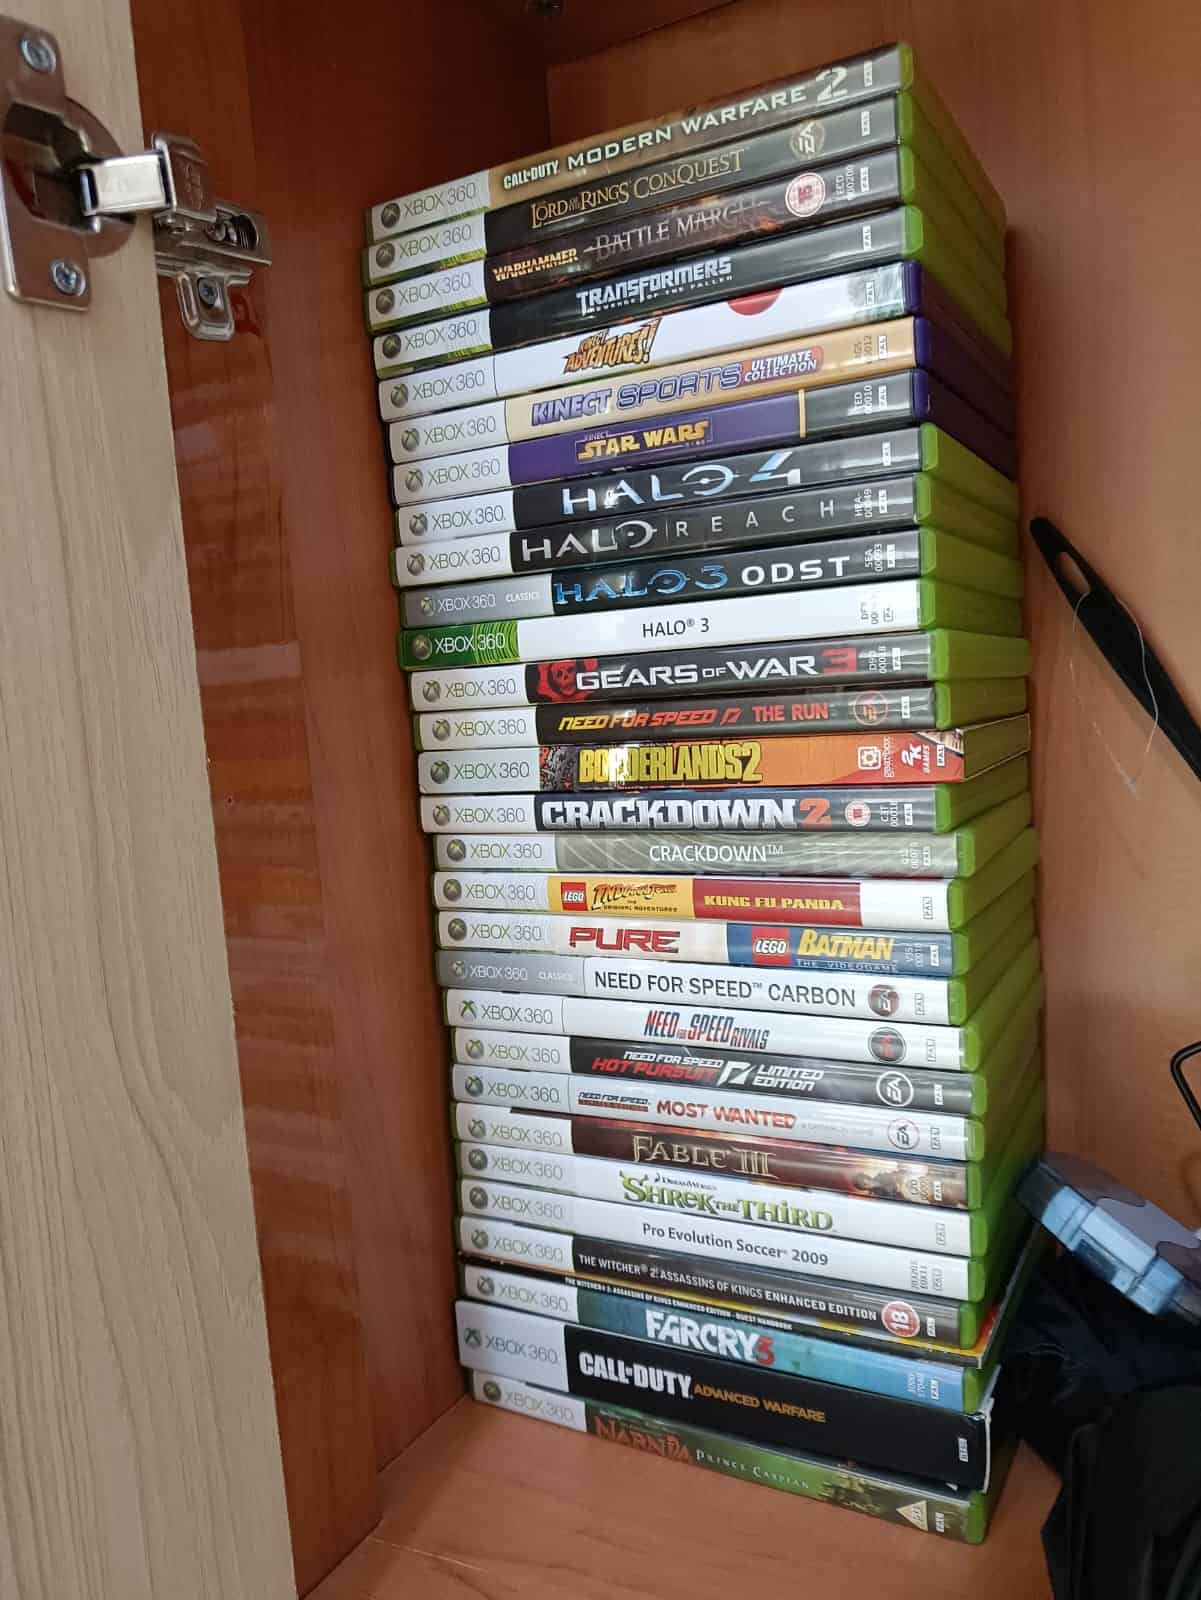 A nostalgic collection of Xbox games in a cabinet, commemorating the lasting impact of the Xbox 360 on my childhood. Image captured by VideoGamer.